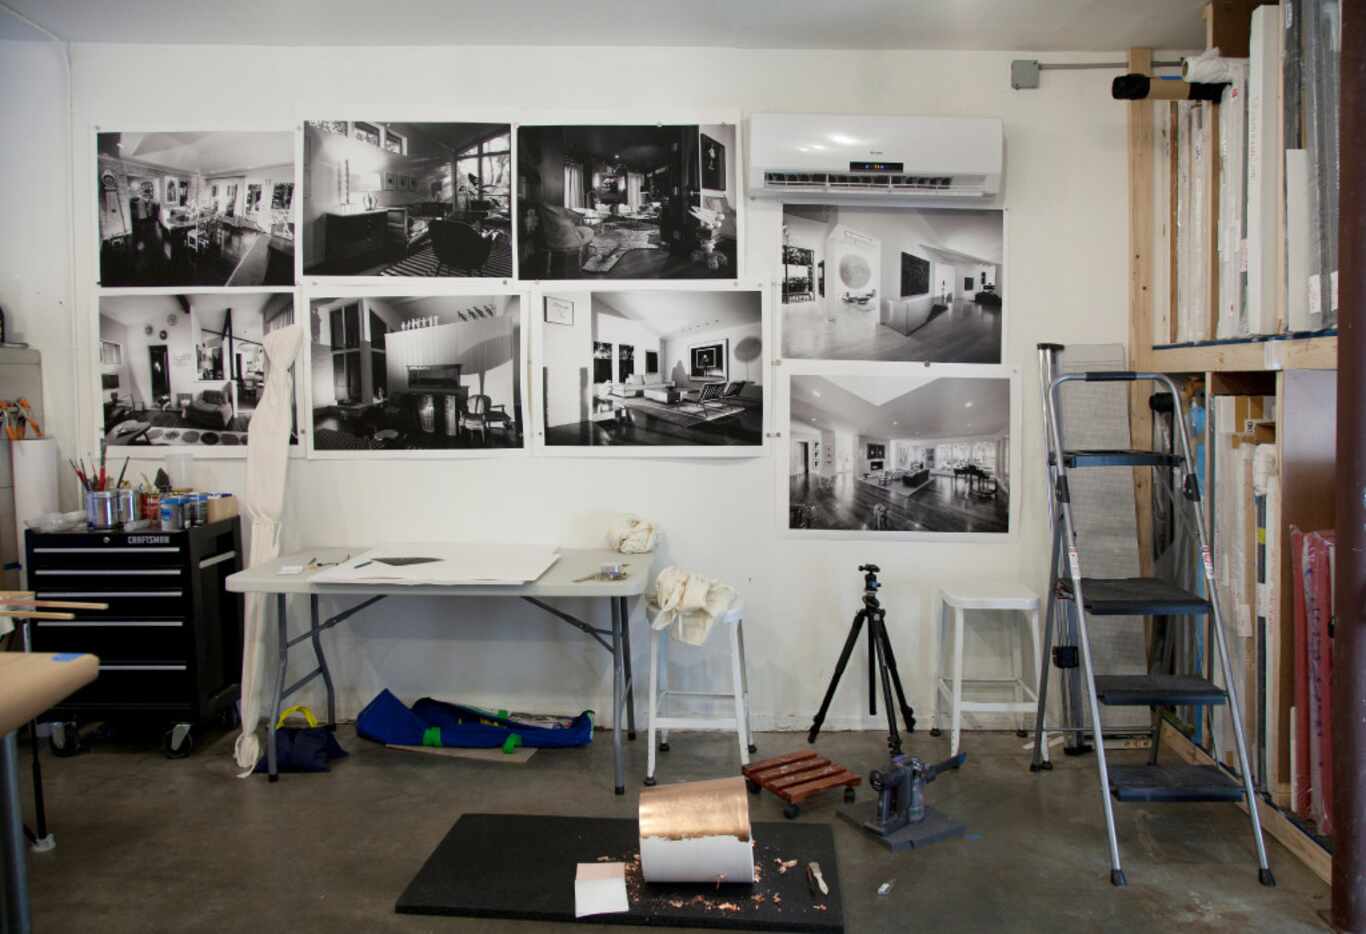 Nic Nicosia's studio includes work for his installation at Erin Cluley Gallery. (Nan...